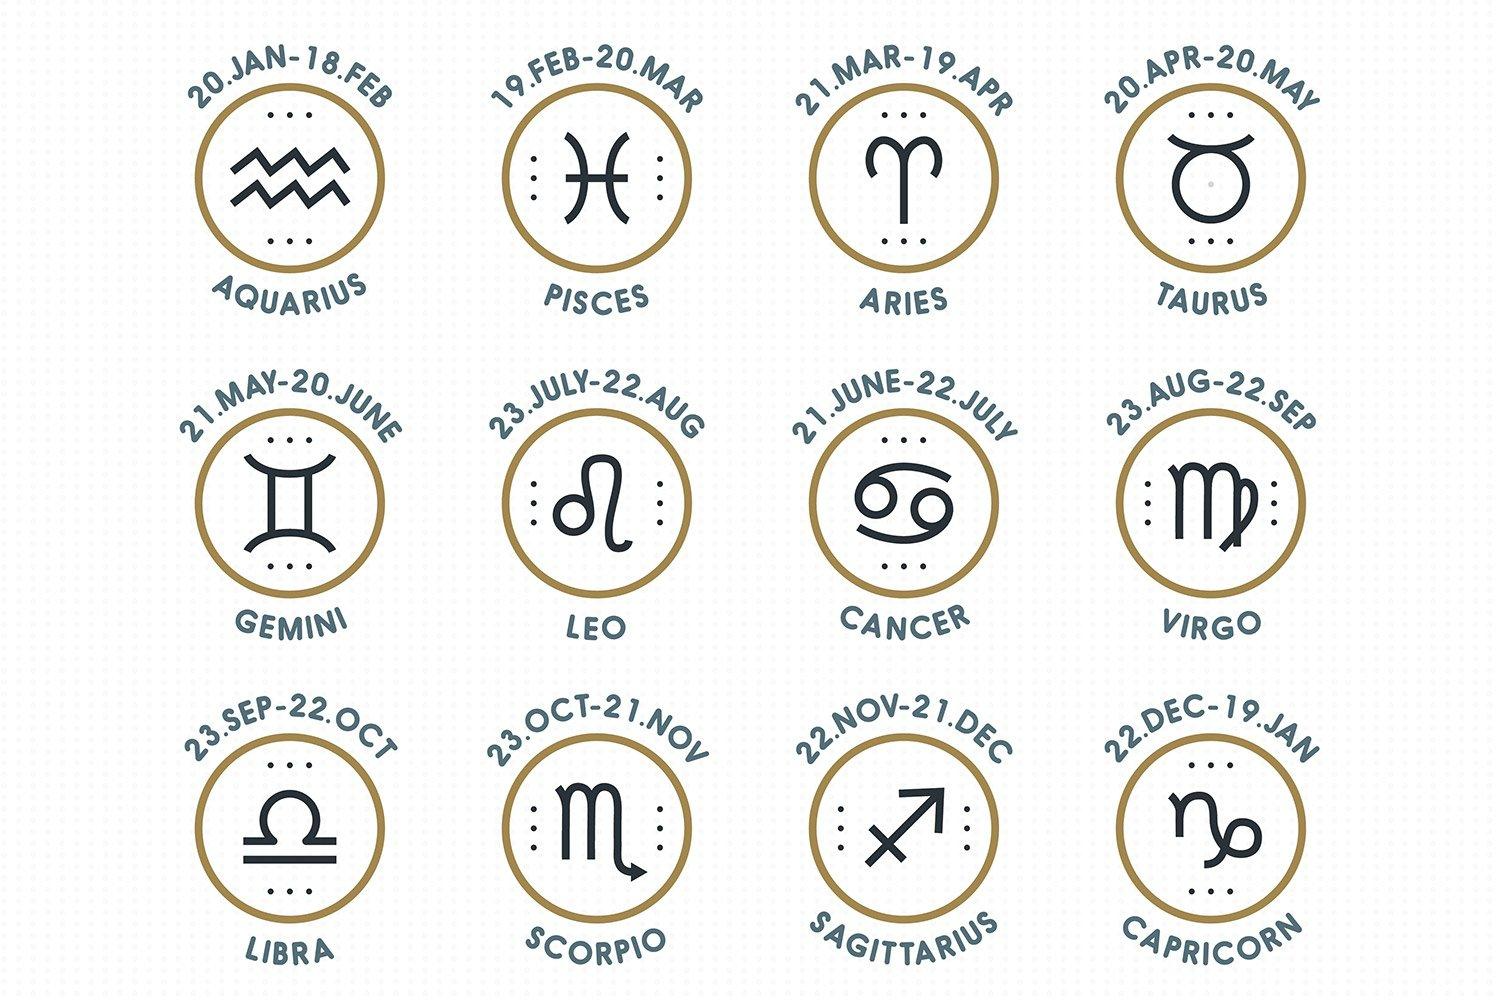 daily horoscope for september 29 astrological prediction zodiac signs